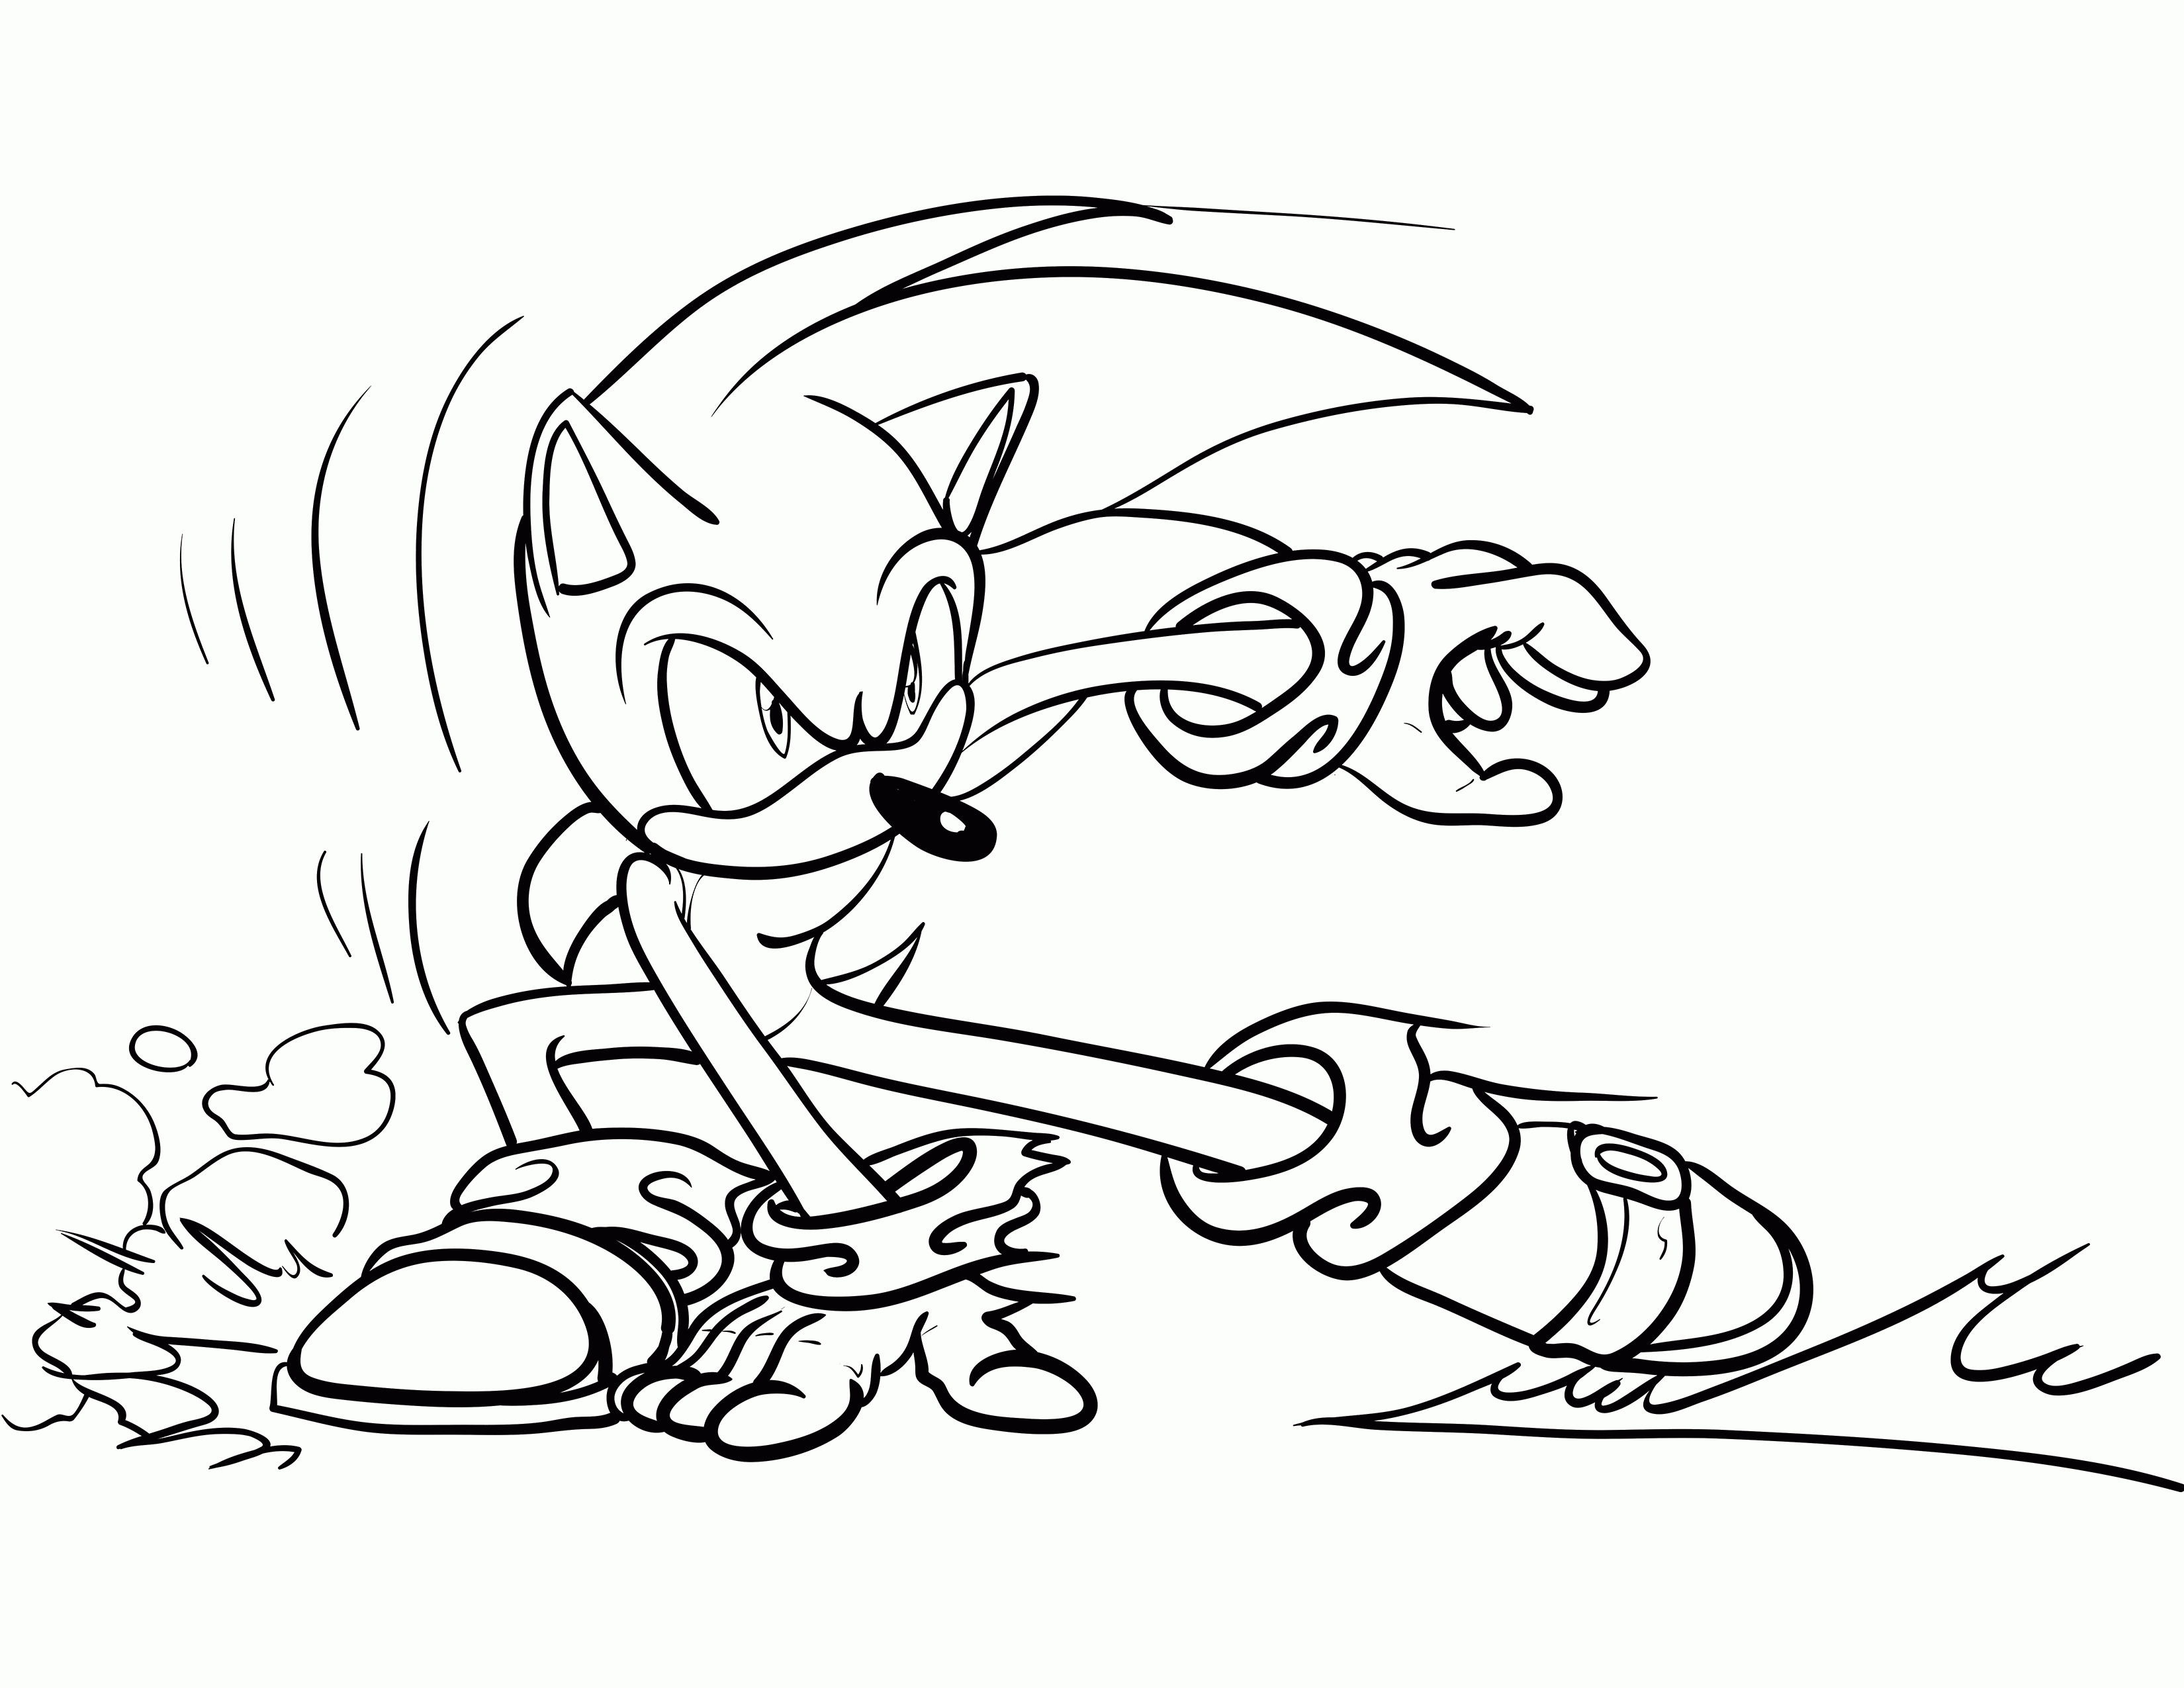 sonic-the-hedgehog-movie-2020-coloring-page-printable